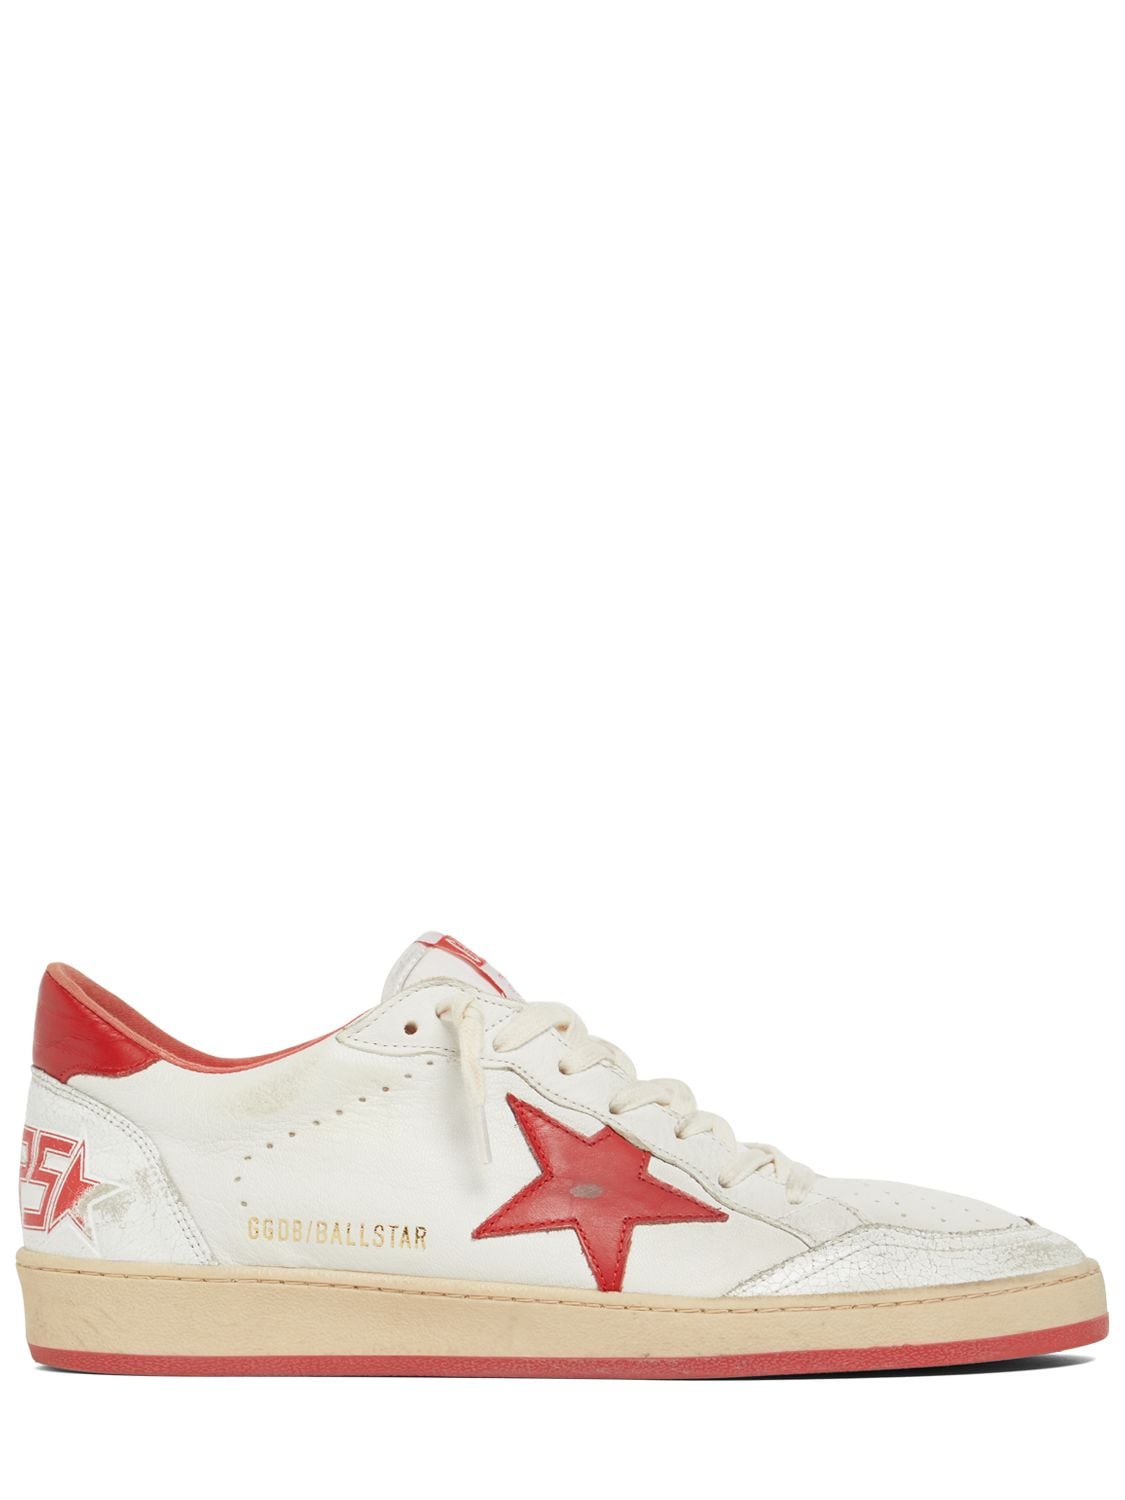 Image of Ball Star Nappa Leather & Nylon Sneakers